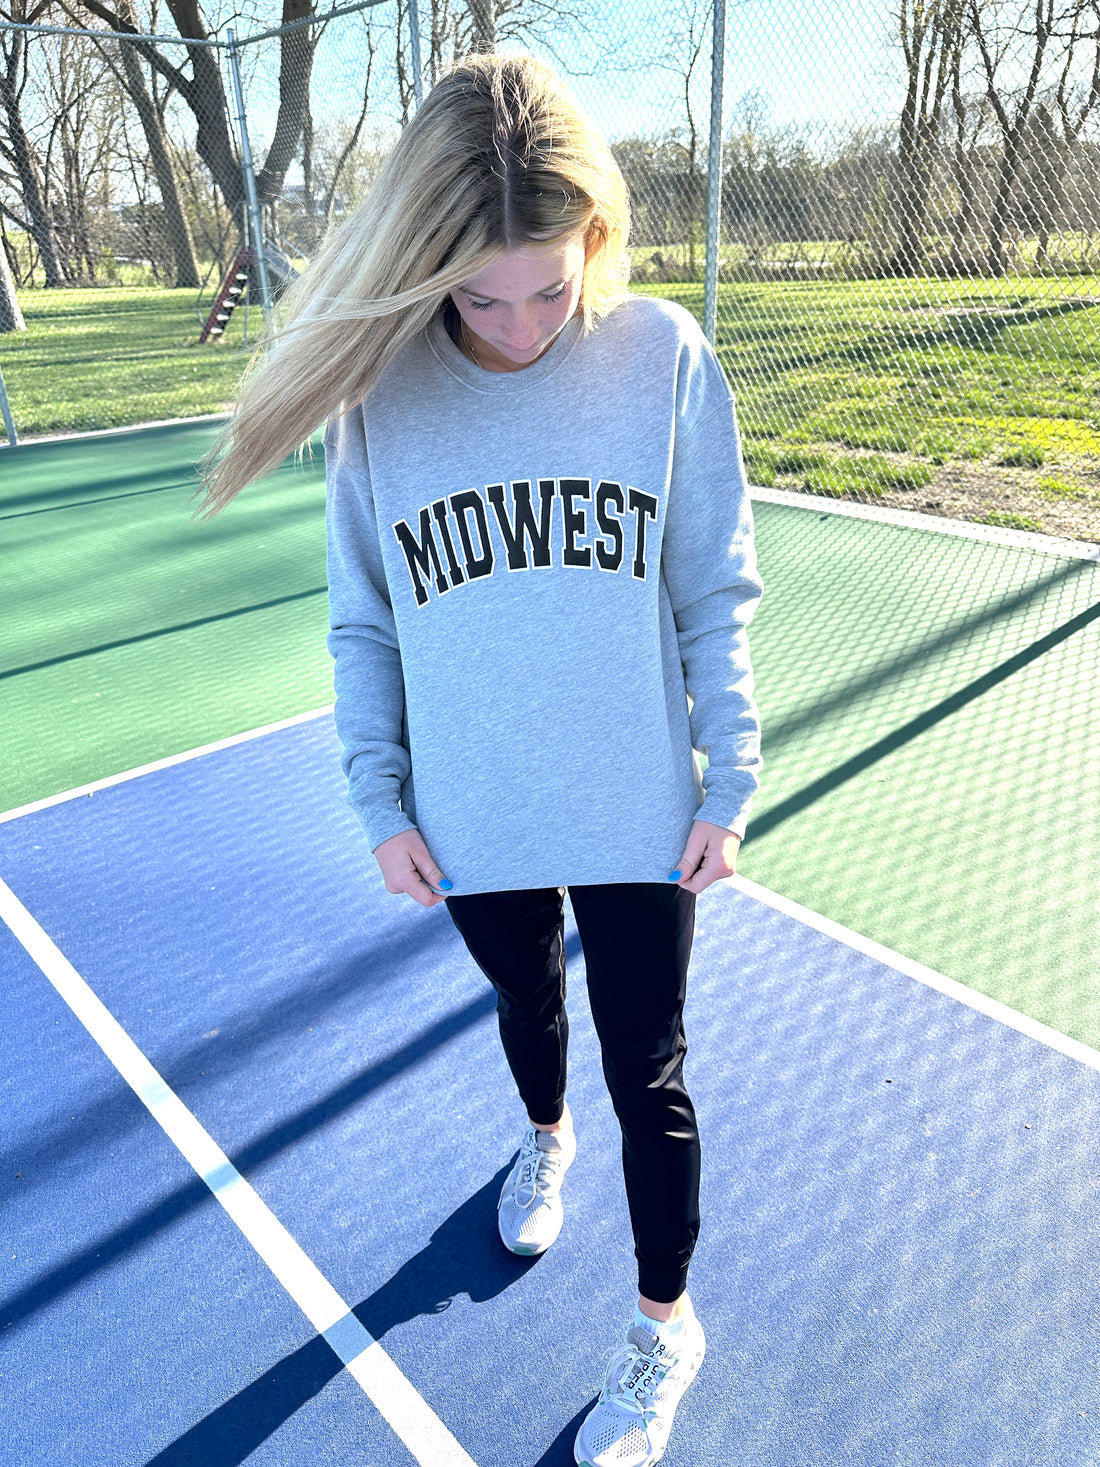 Midwest Puff Print